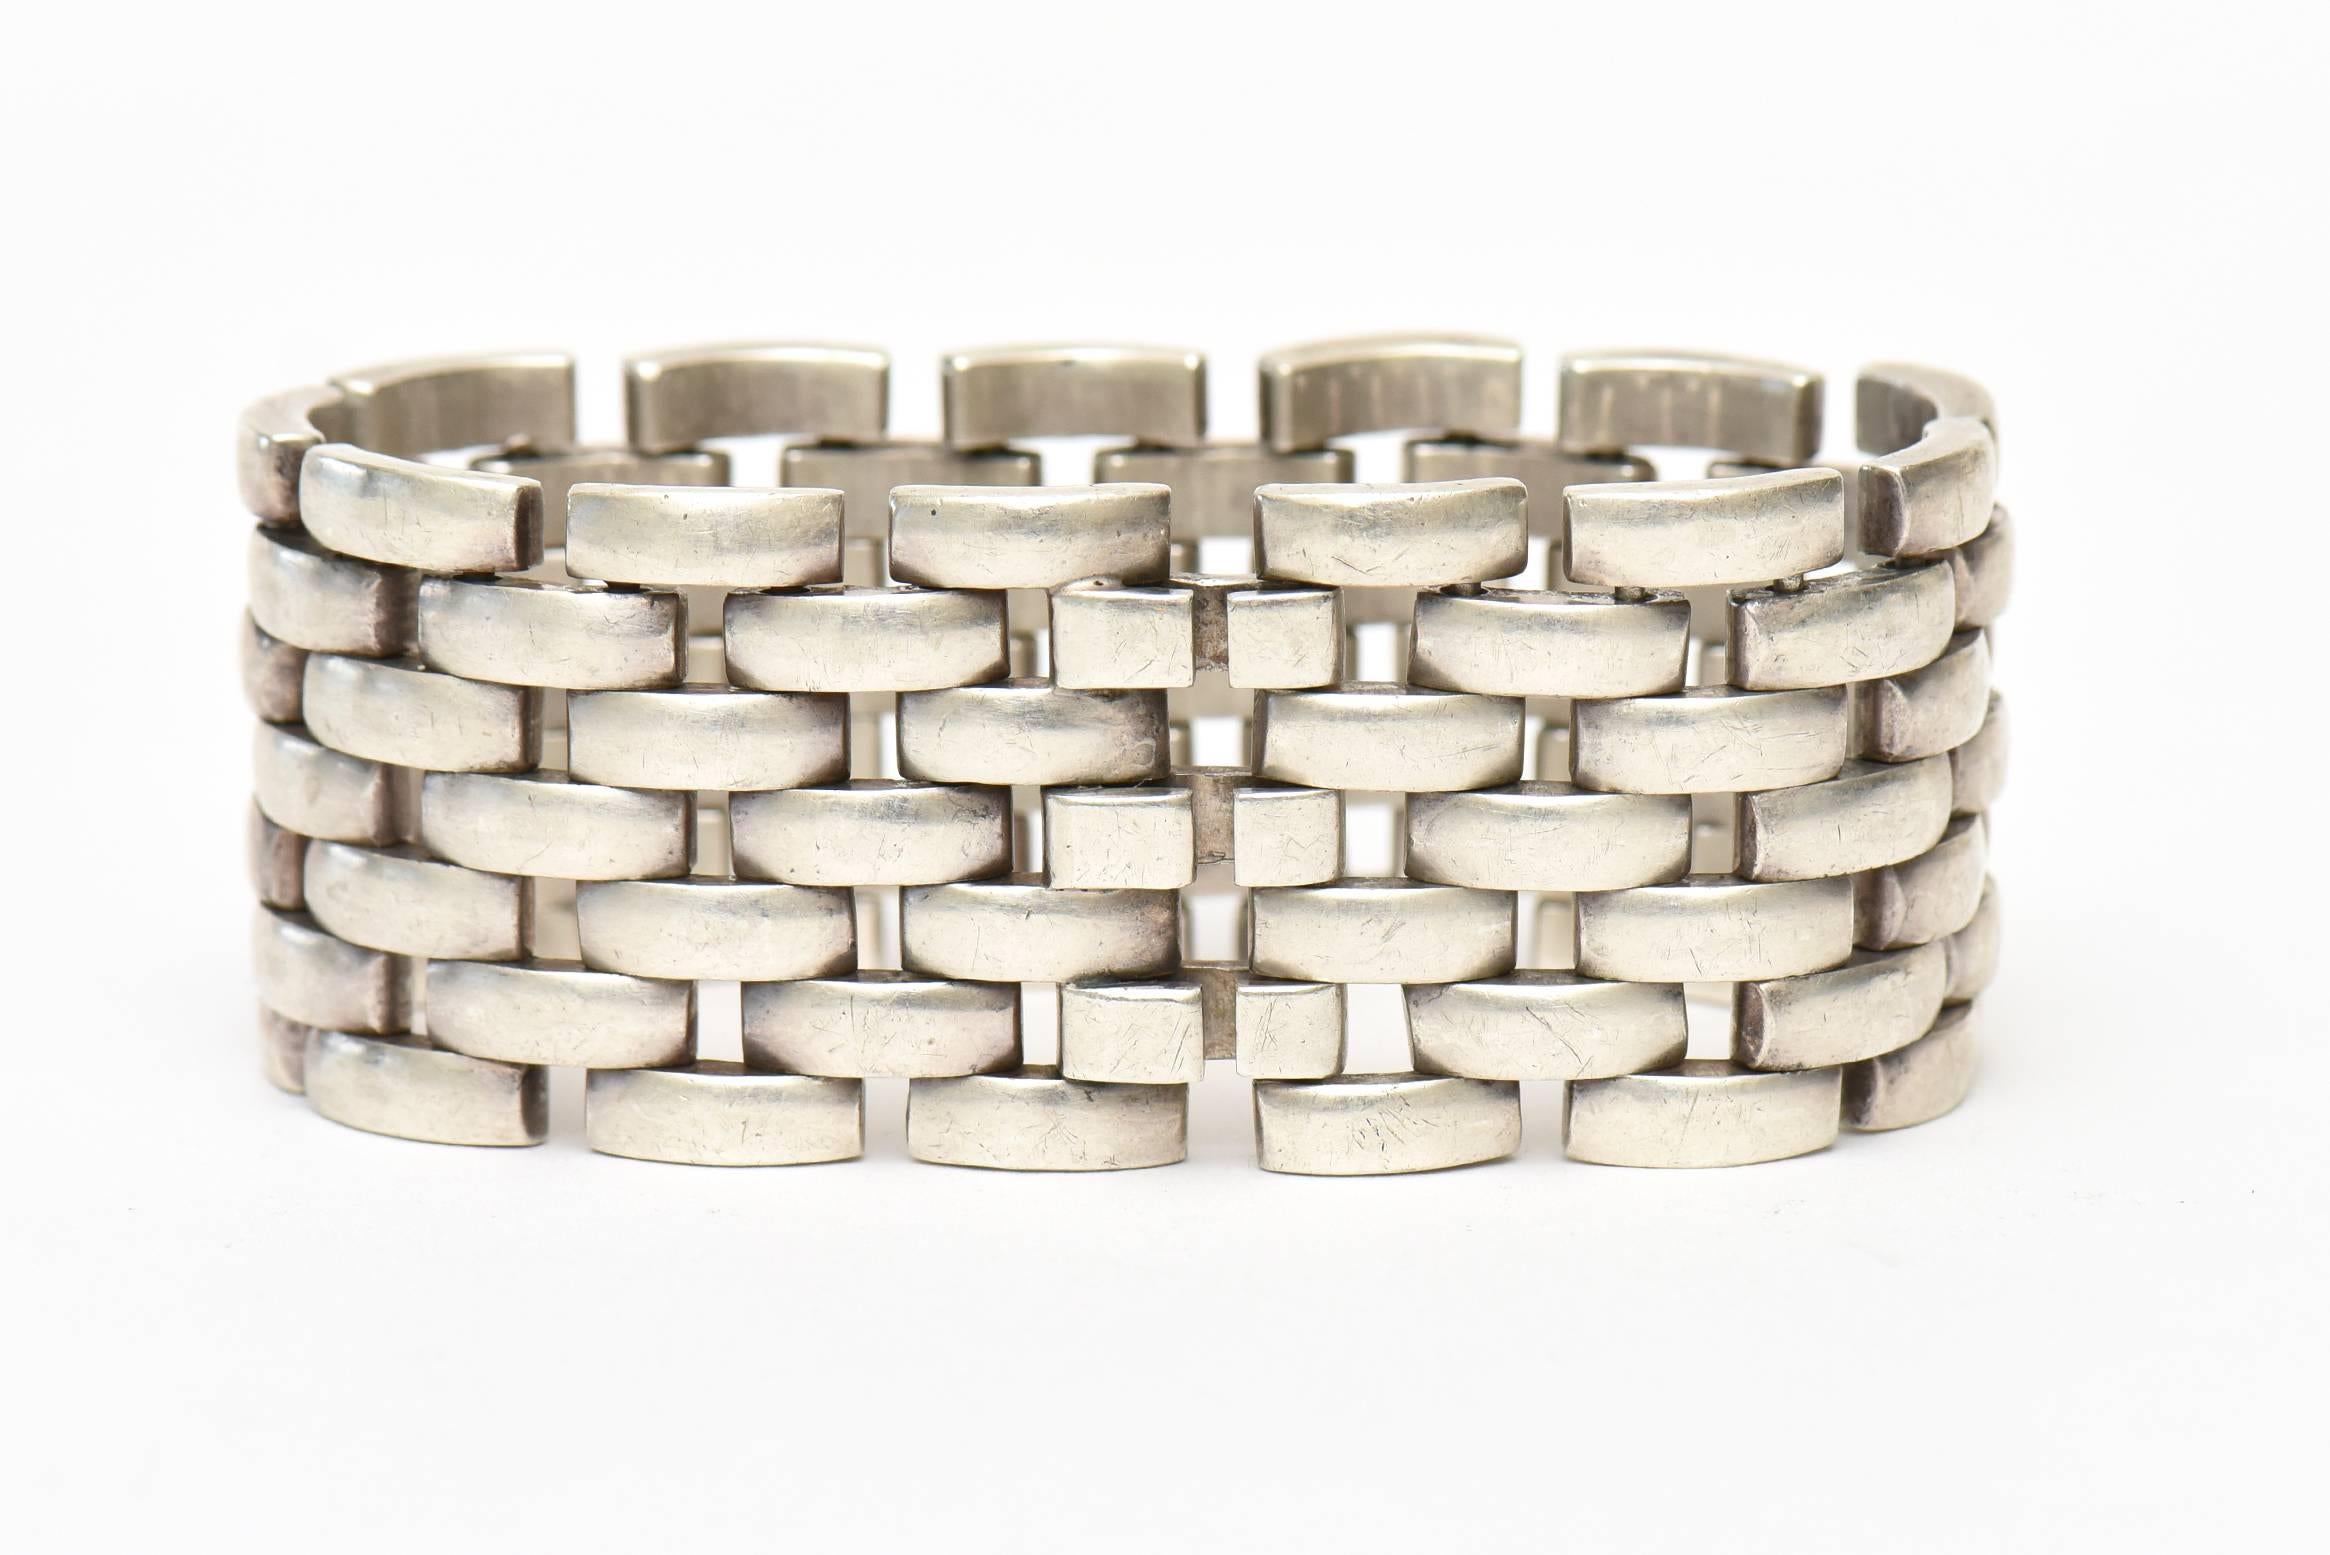 This stunning hallmarked sterling silver cuff bracelet is a classic. It will go day to evening for wear and all seasons. Timeless!  Modern! The measurements when the bracelet is opened are 7.25